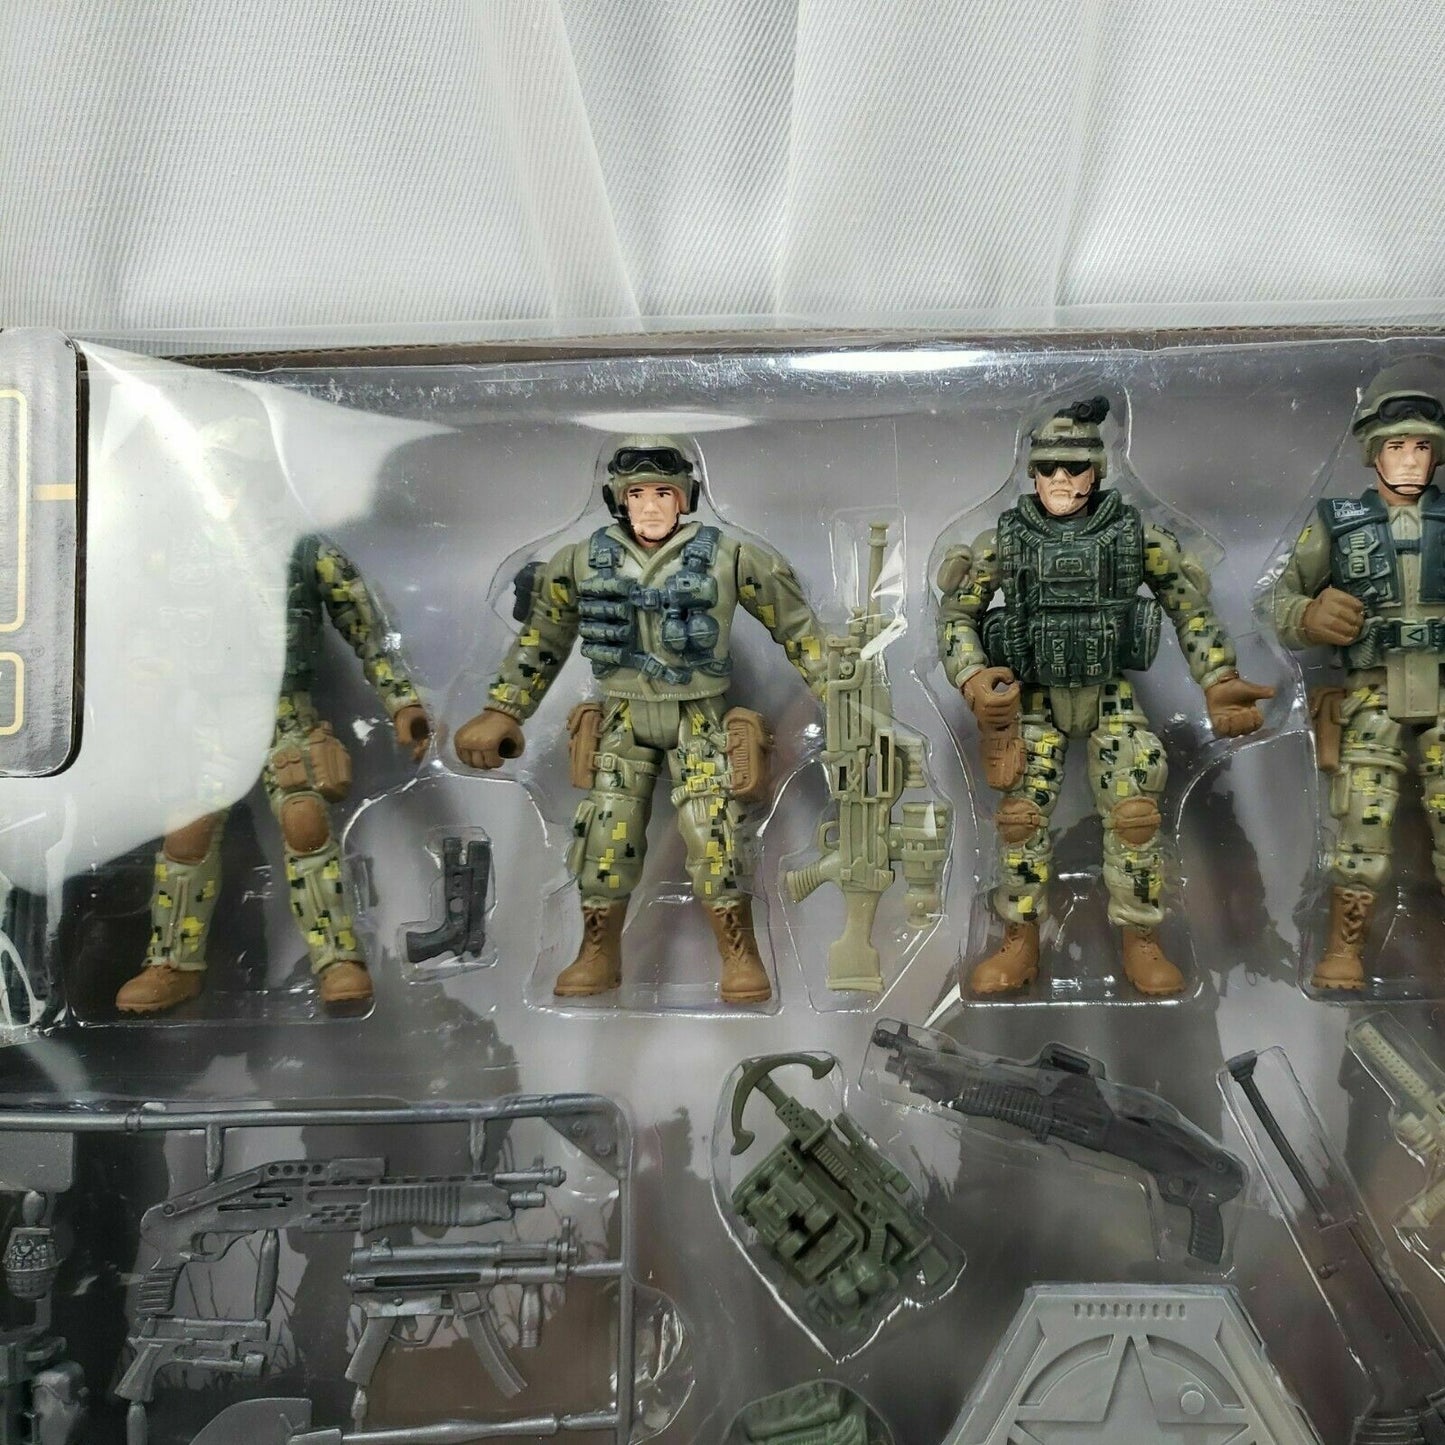 U.S. ARMY SOLDIERS 4 Figures, Equipment & Weapons Excite Licensed Product HTF